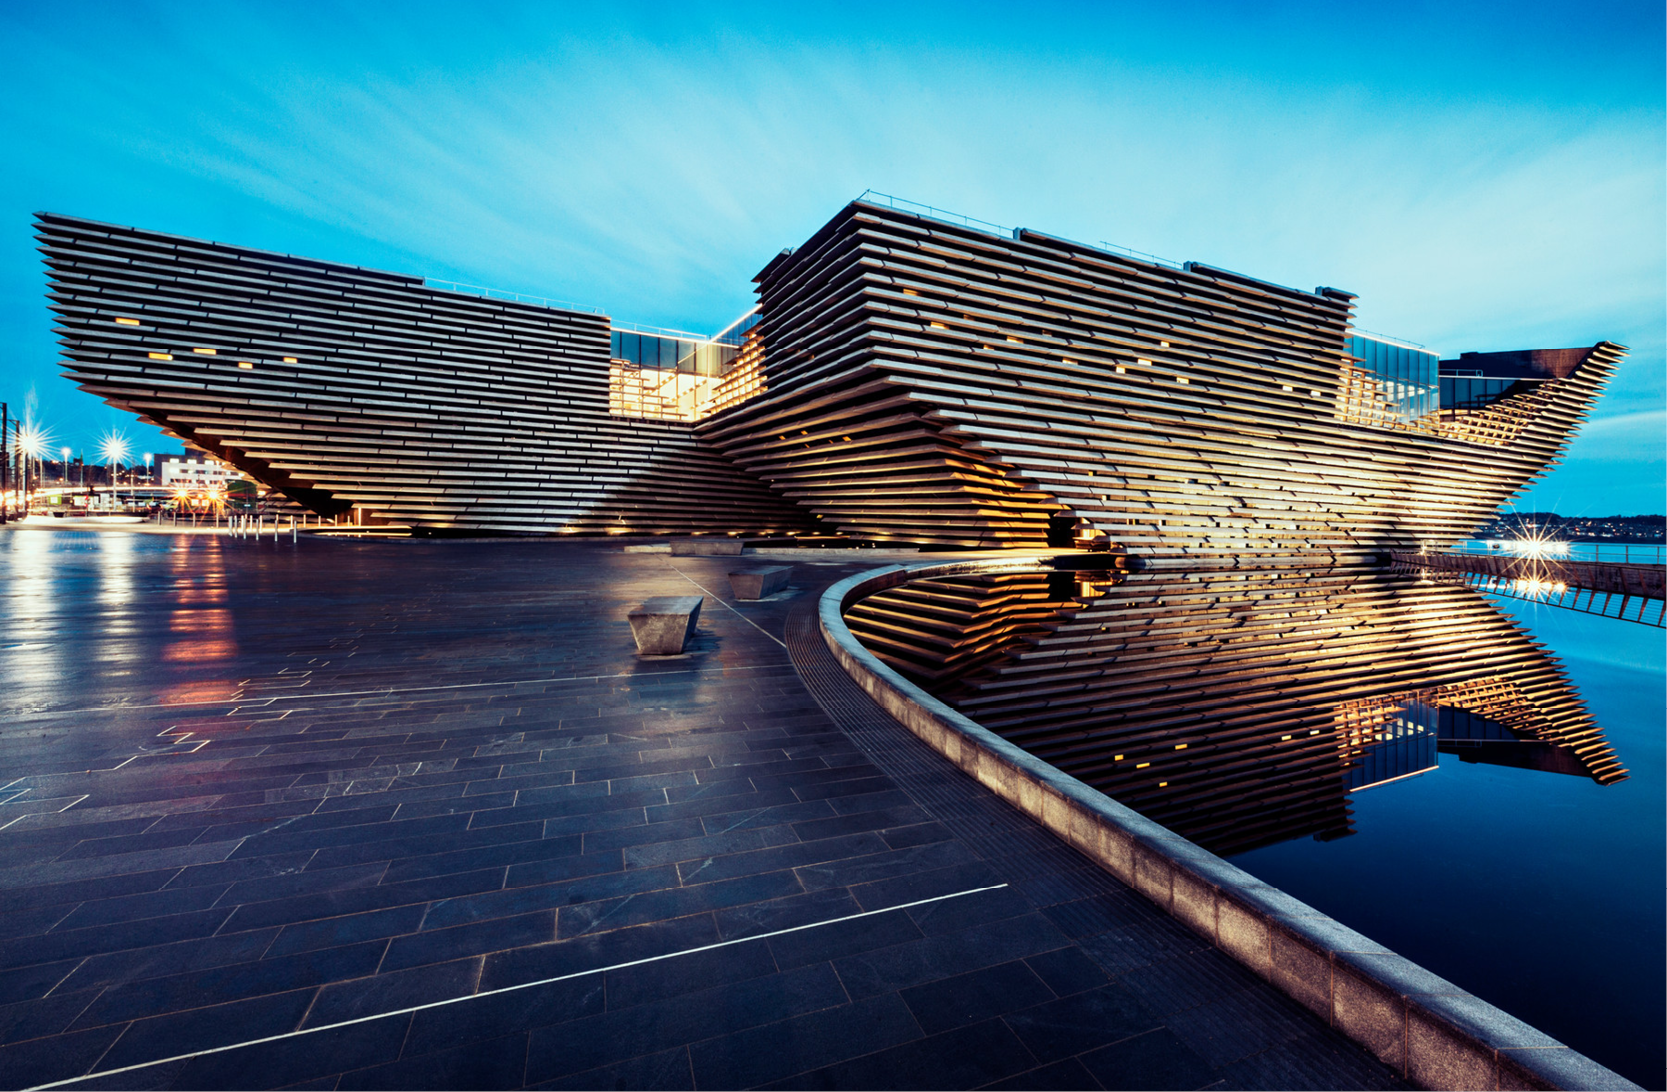 V&A Museum Dundee Case Study